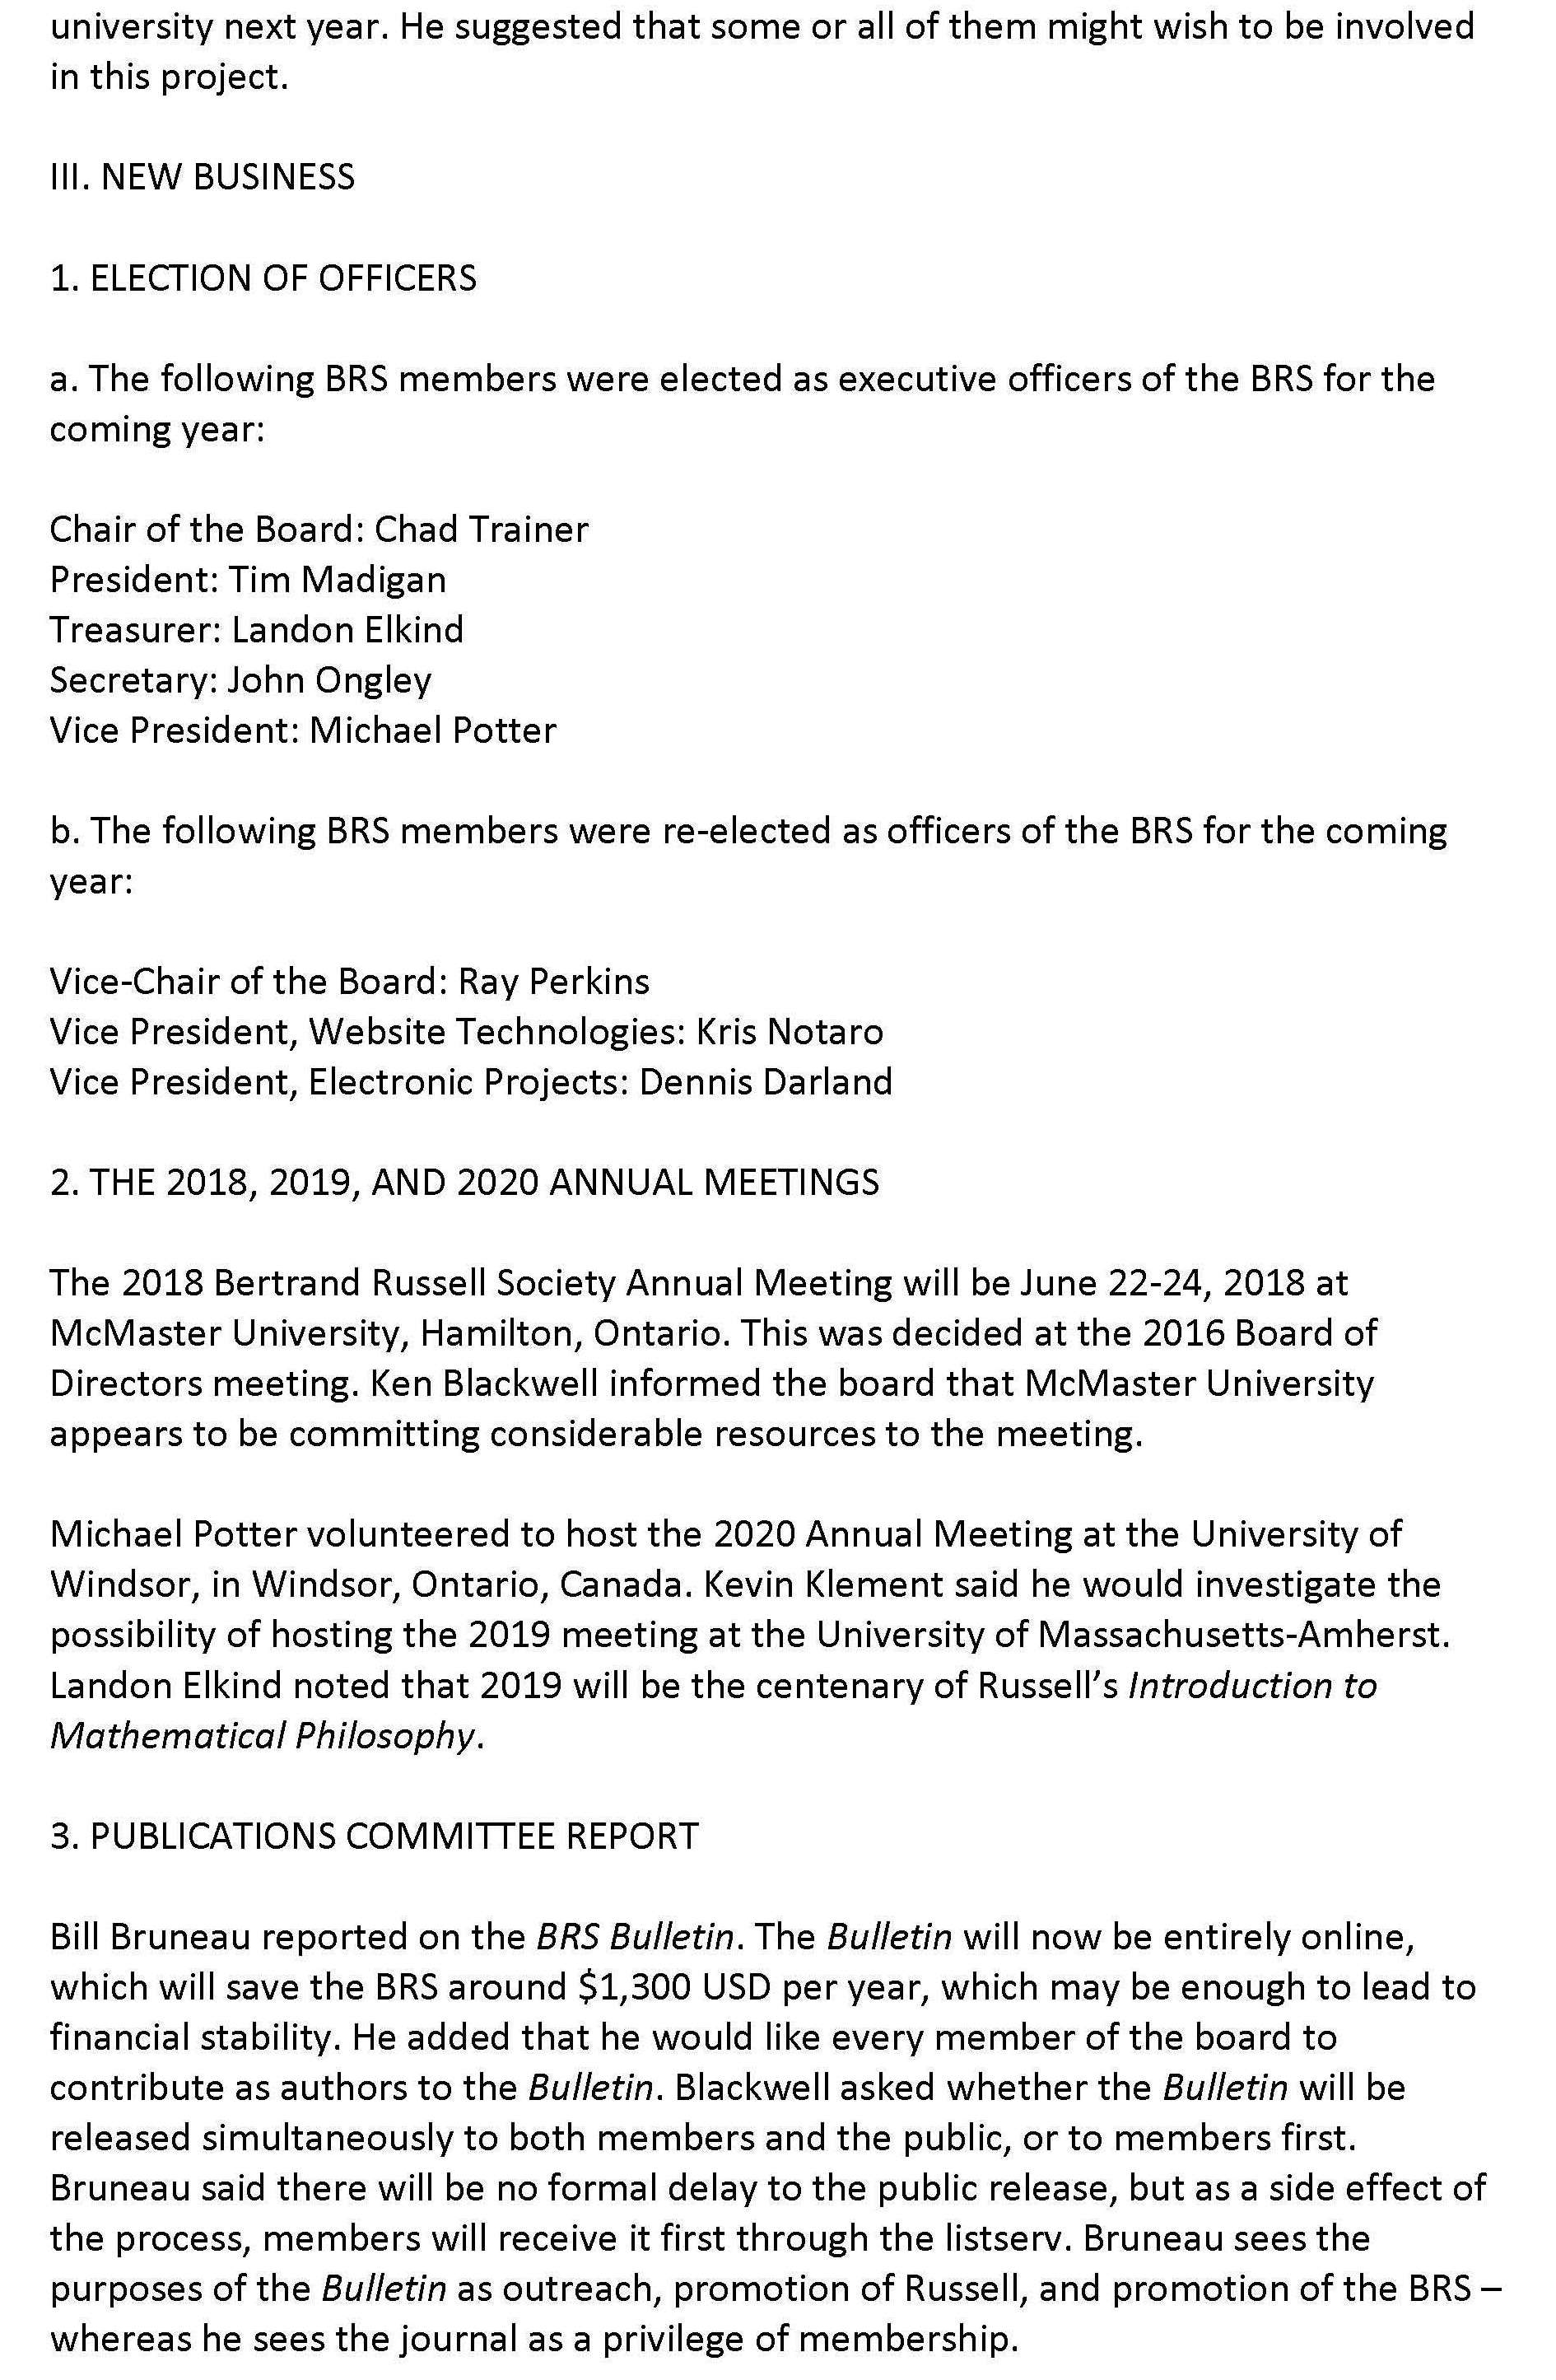 BRS Annual Board Meeting Minutes